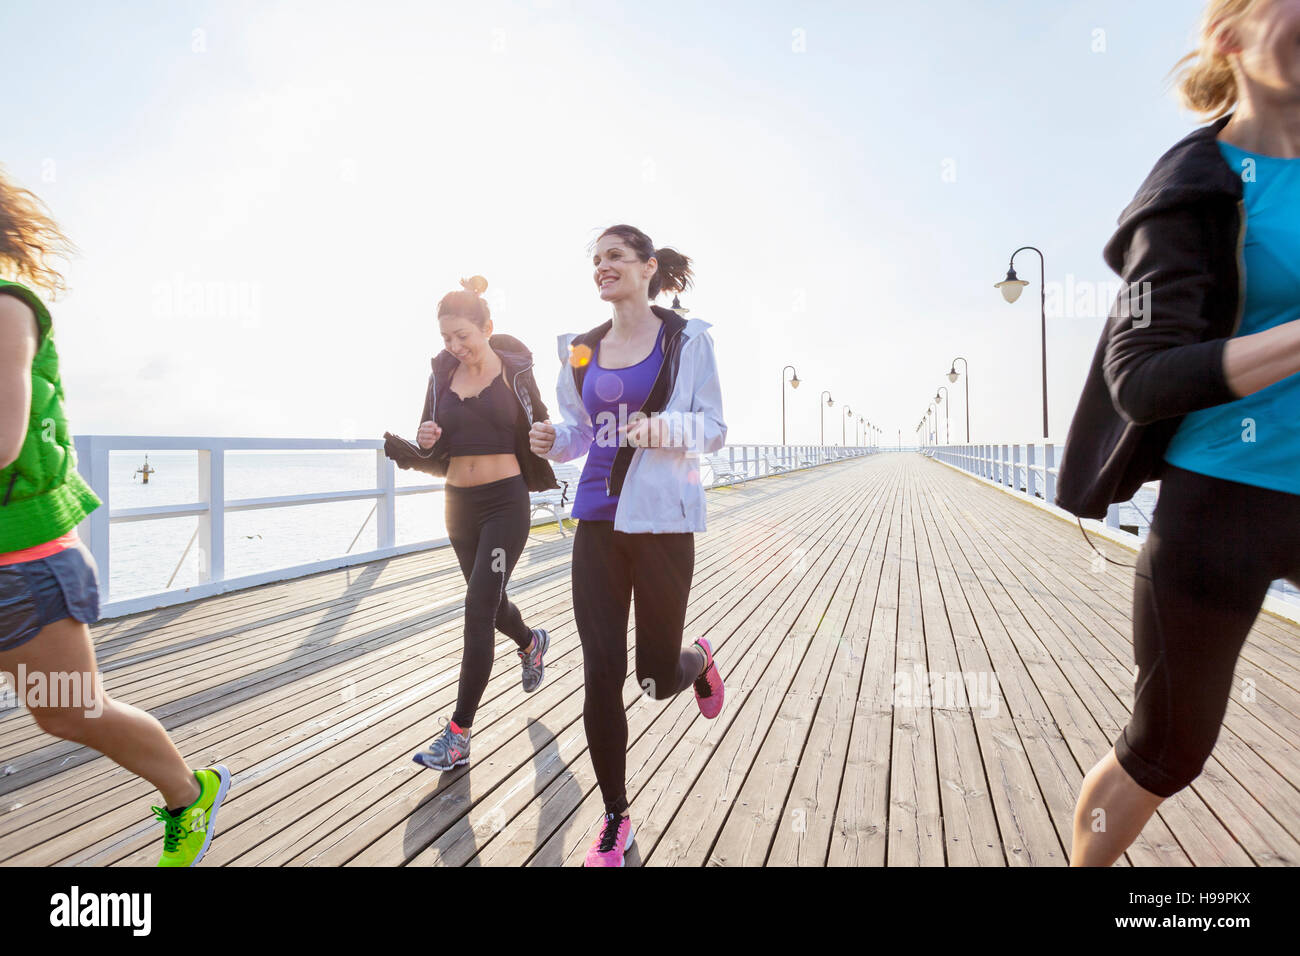 Group of women in sports clothing running on jetty Stock Photo